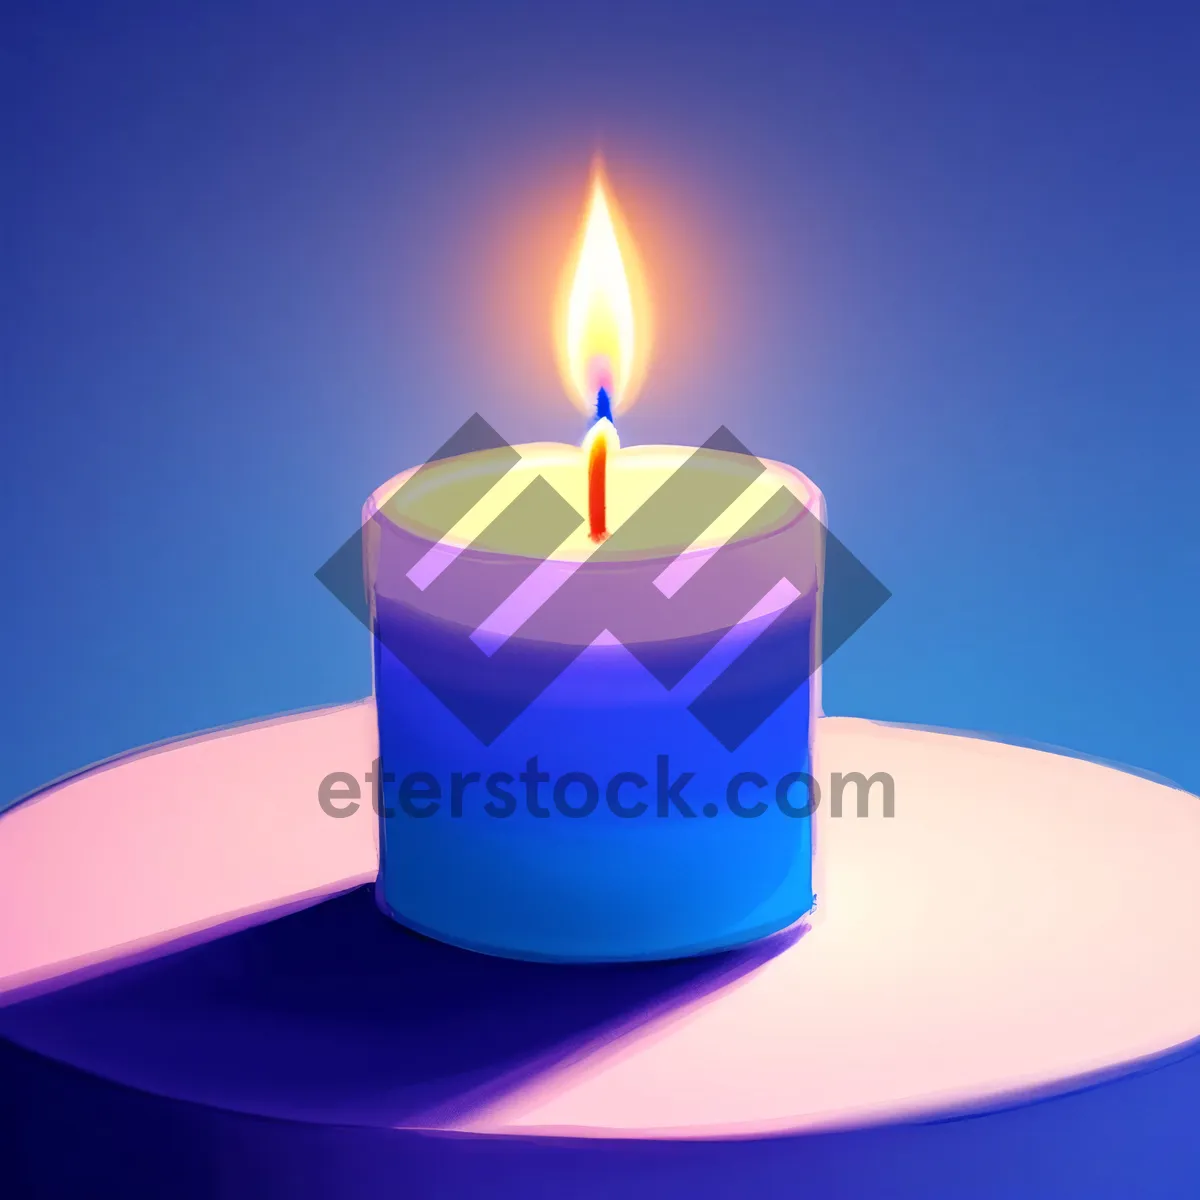 Picture of Flaming Candle - Symbol of Celebration and Warmth